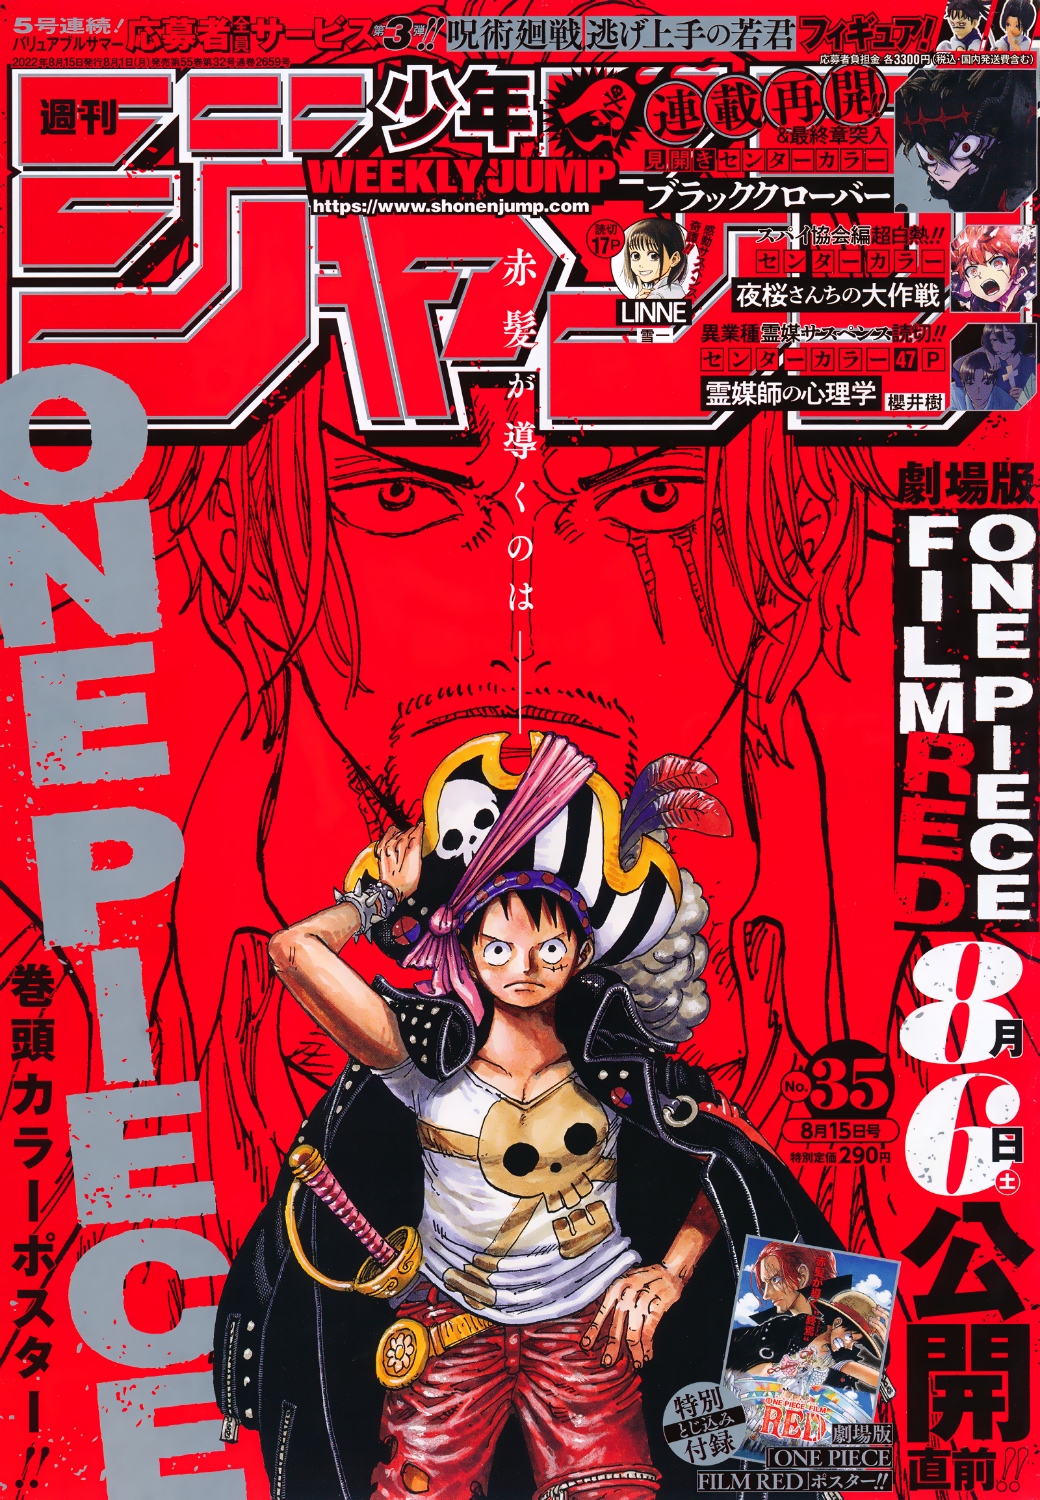 One Piece: Chapter 1055 - Page 1